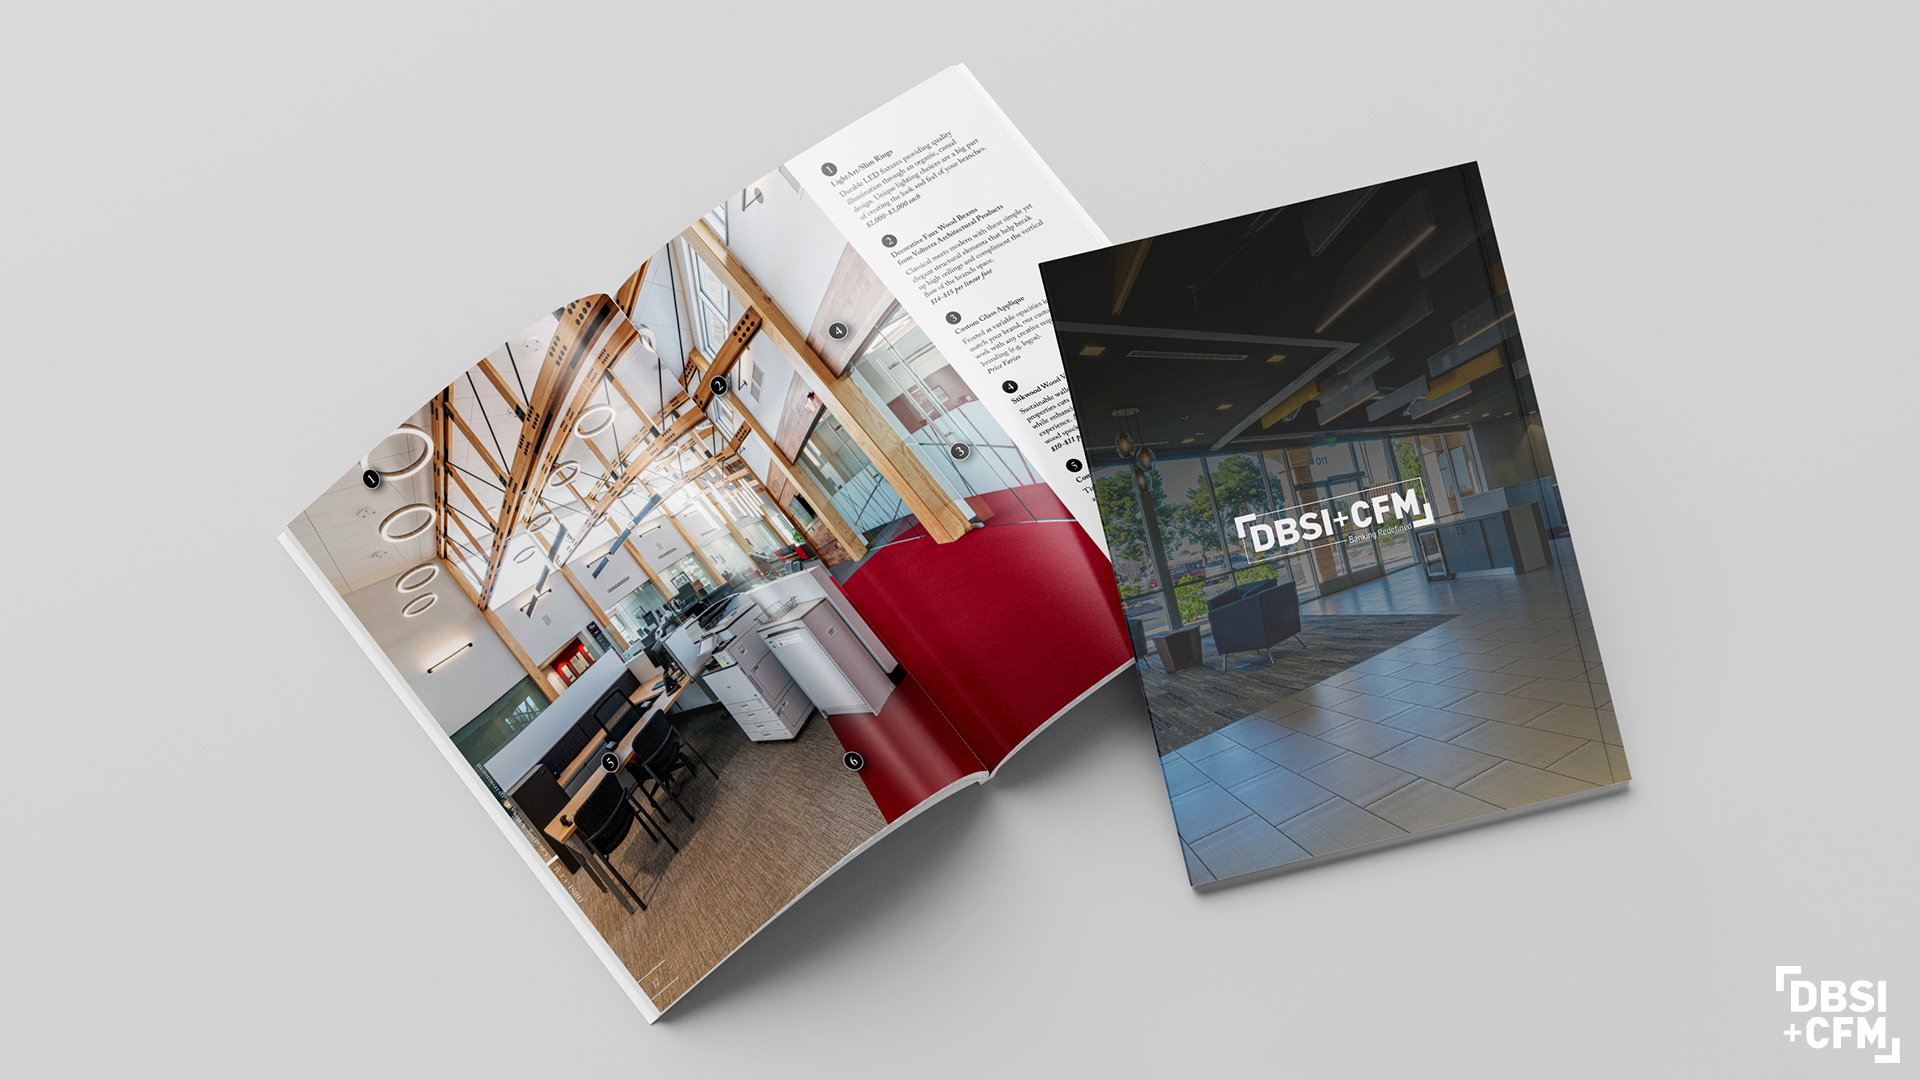 featured image four:Creating a Retail Environment